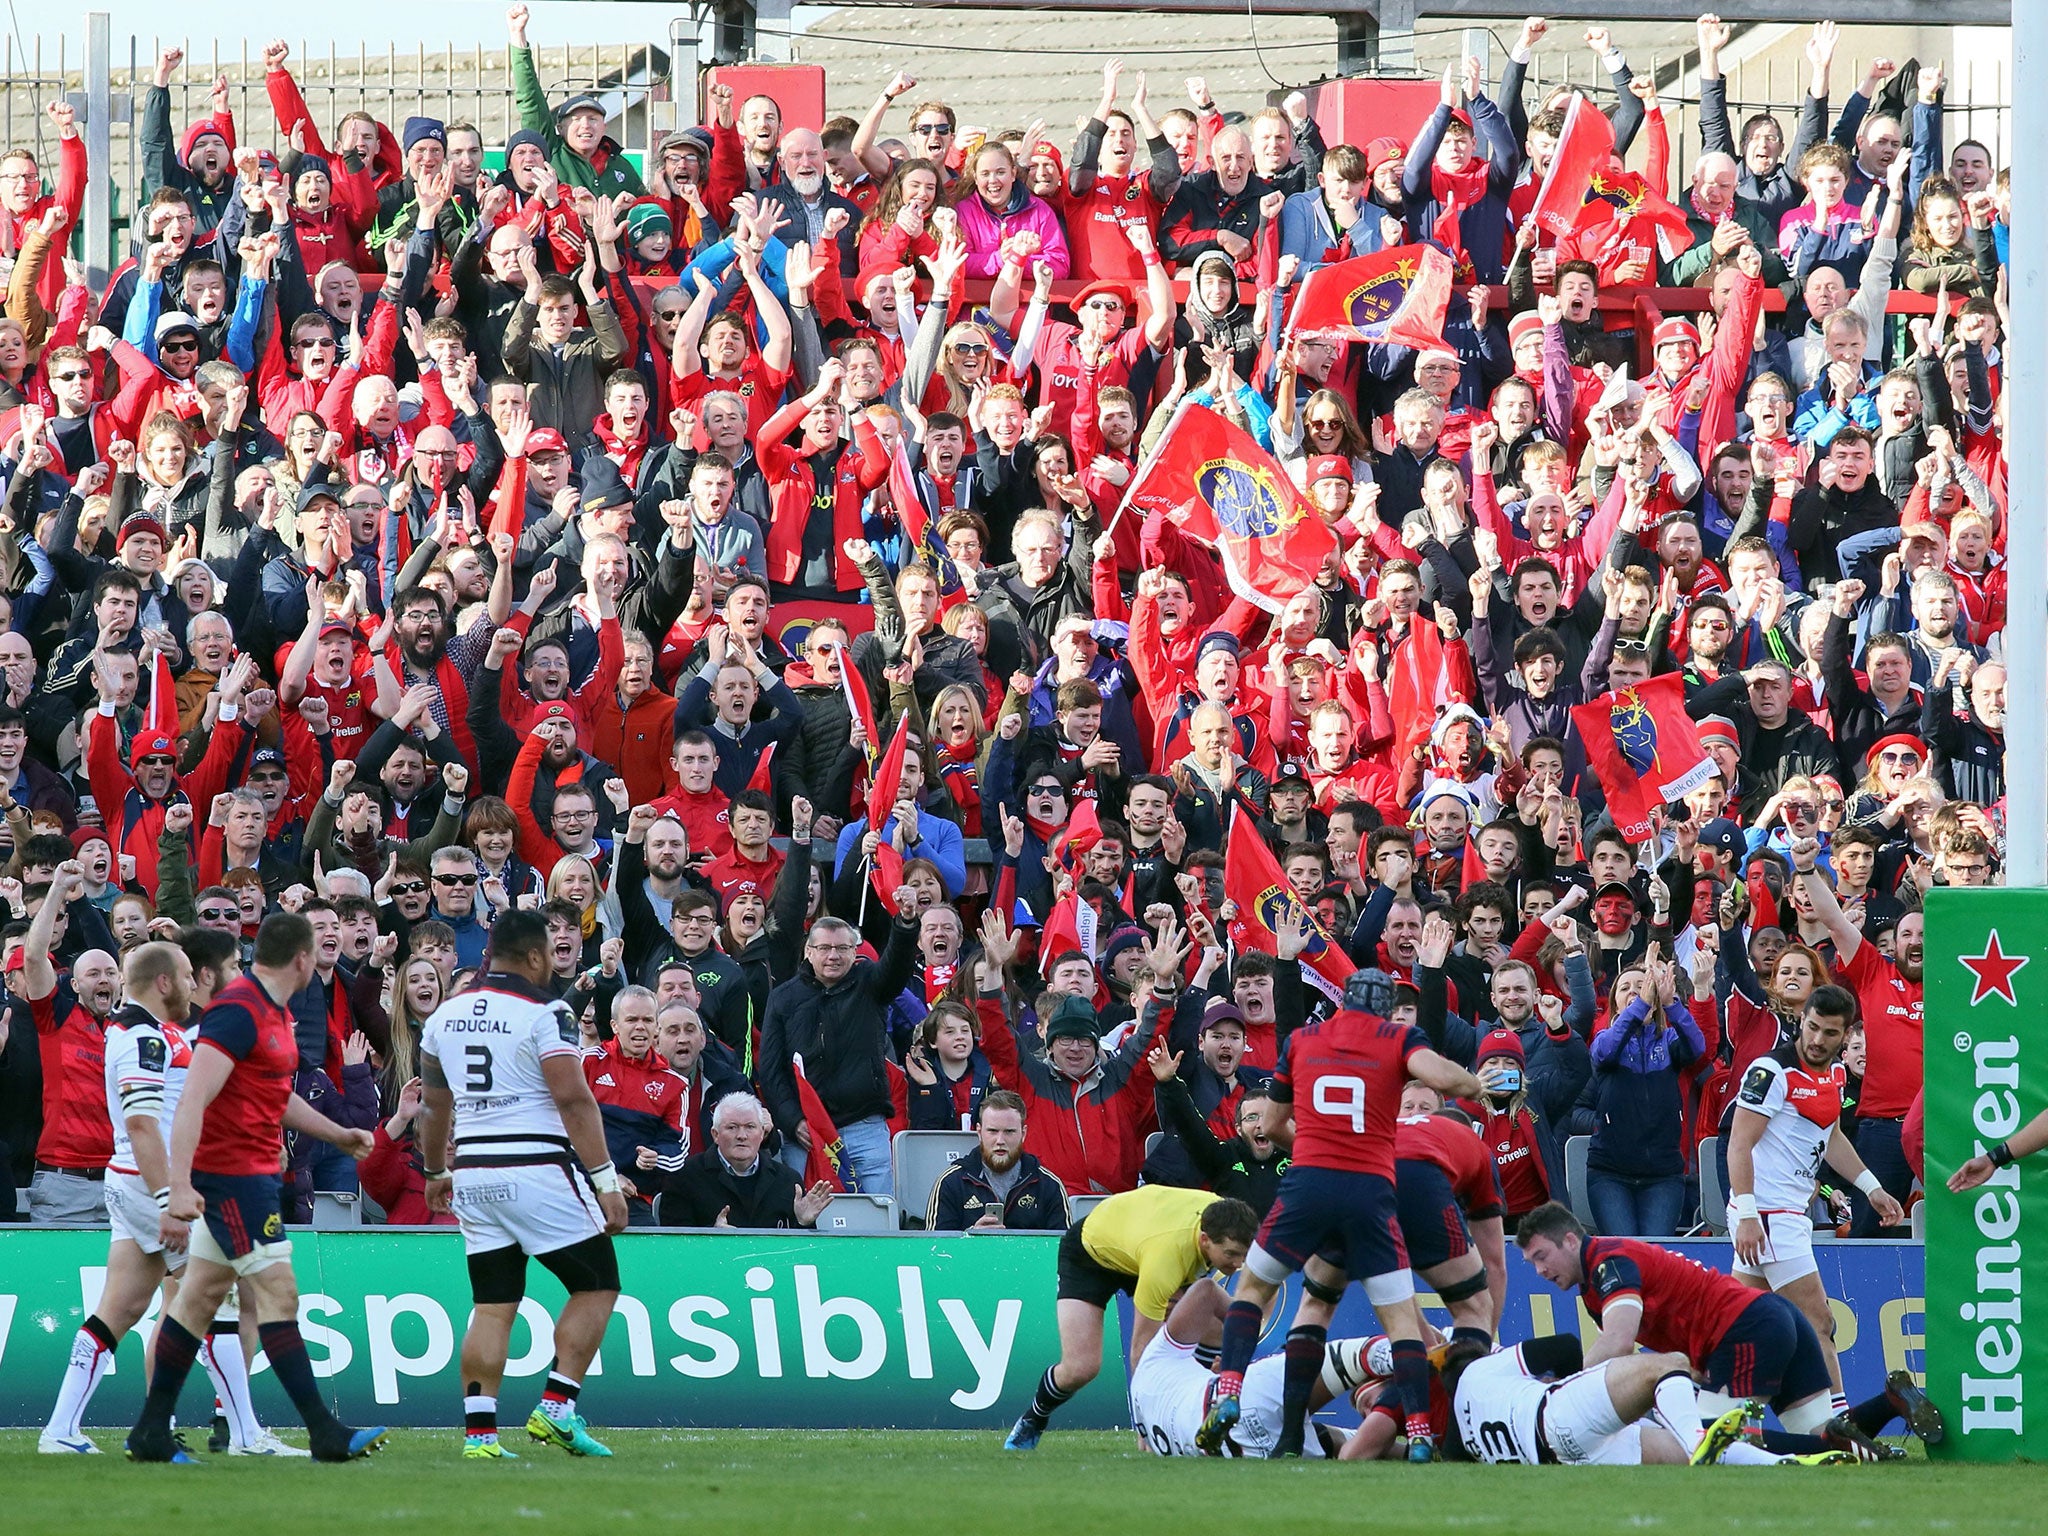 Munster fans celebrate their team's first try during the European Champions Cup quarter-final rugby